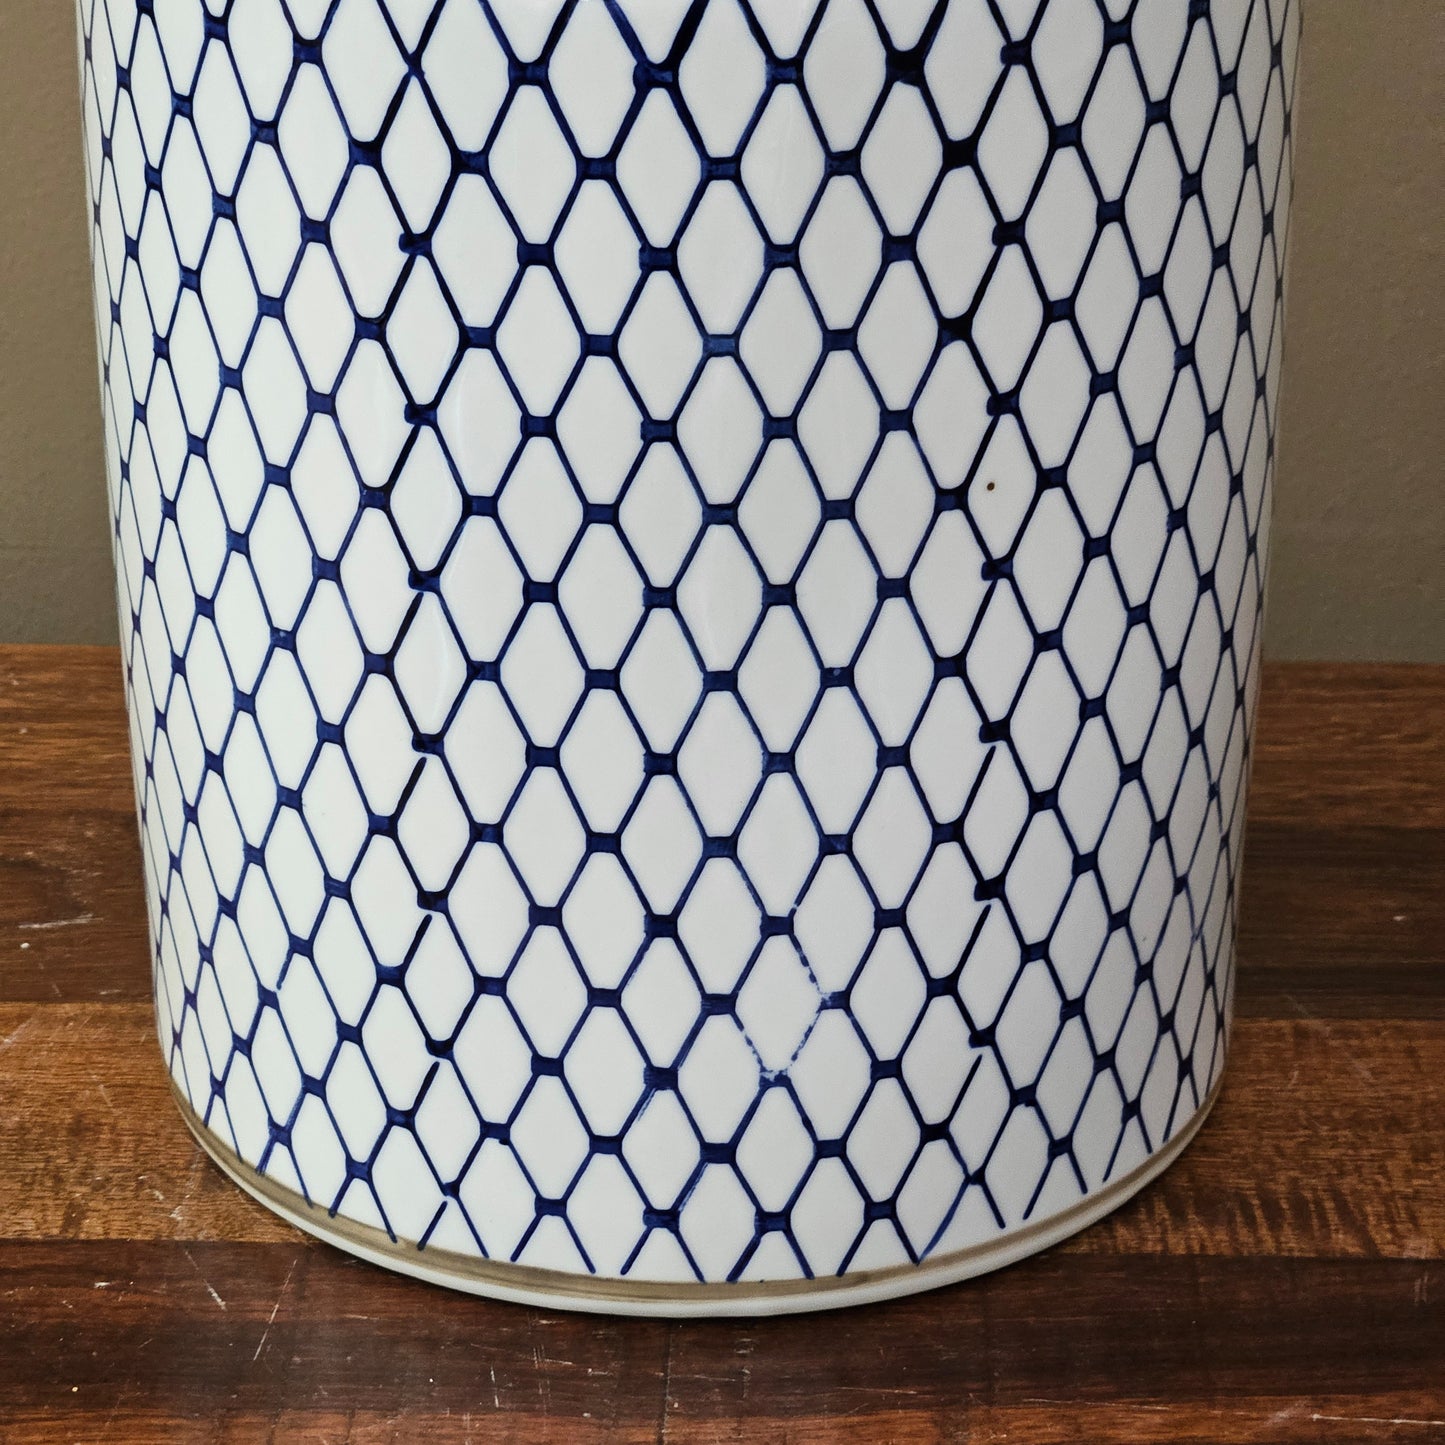 12" Blue & White Porcelain Canister Jar with Netted Design & Lid ~ 4 Available